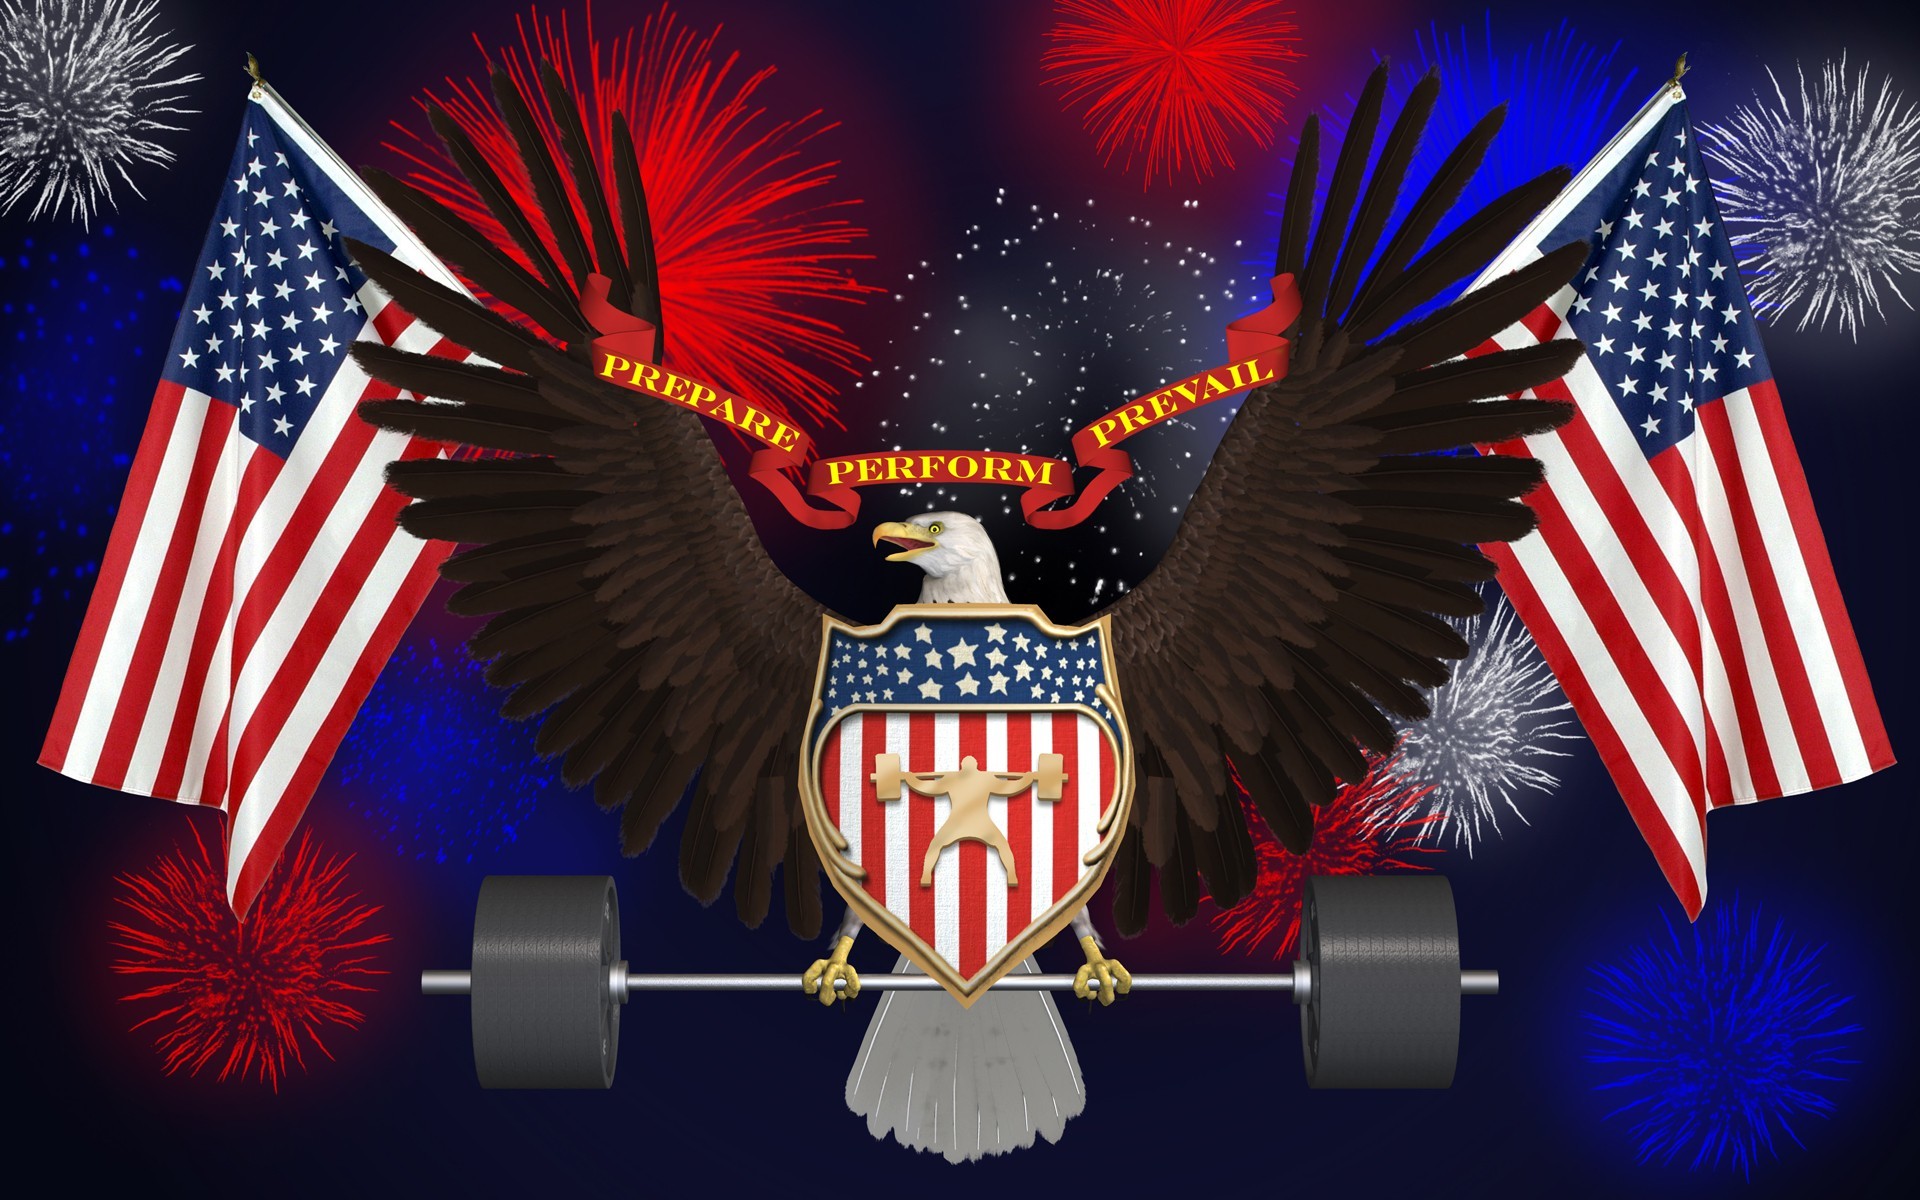 1920x1200 American Eagle And Flag Images July Usa Fireworks Memorial Day Holiday Birb  Desktop Hd Wallpapers For Mobile Phones And Computer 1920Ã1200